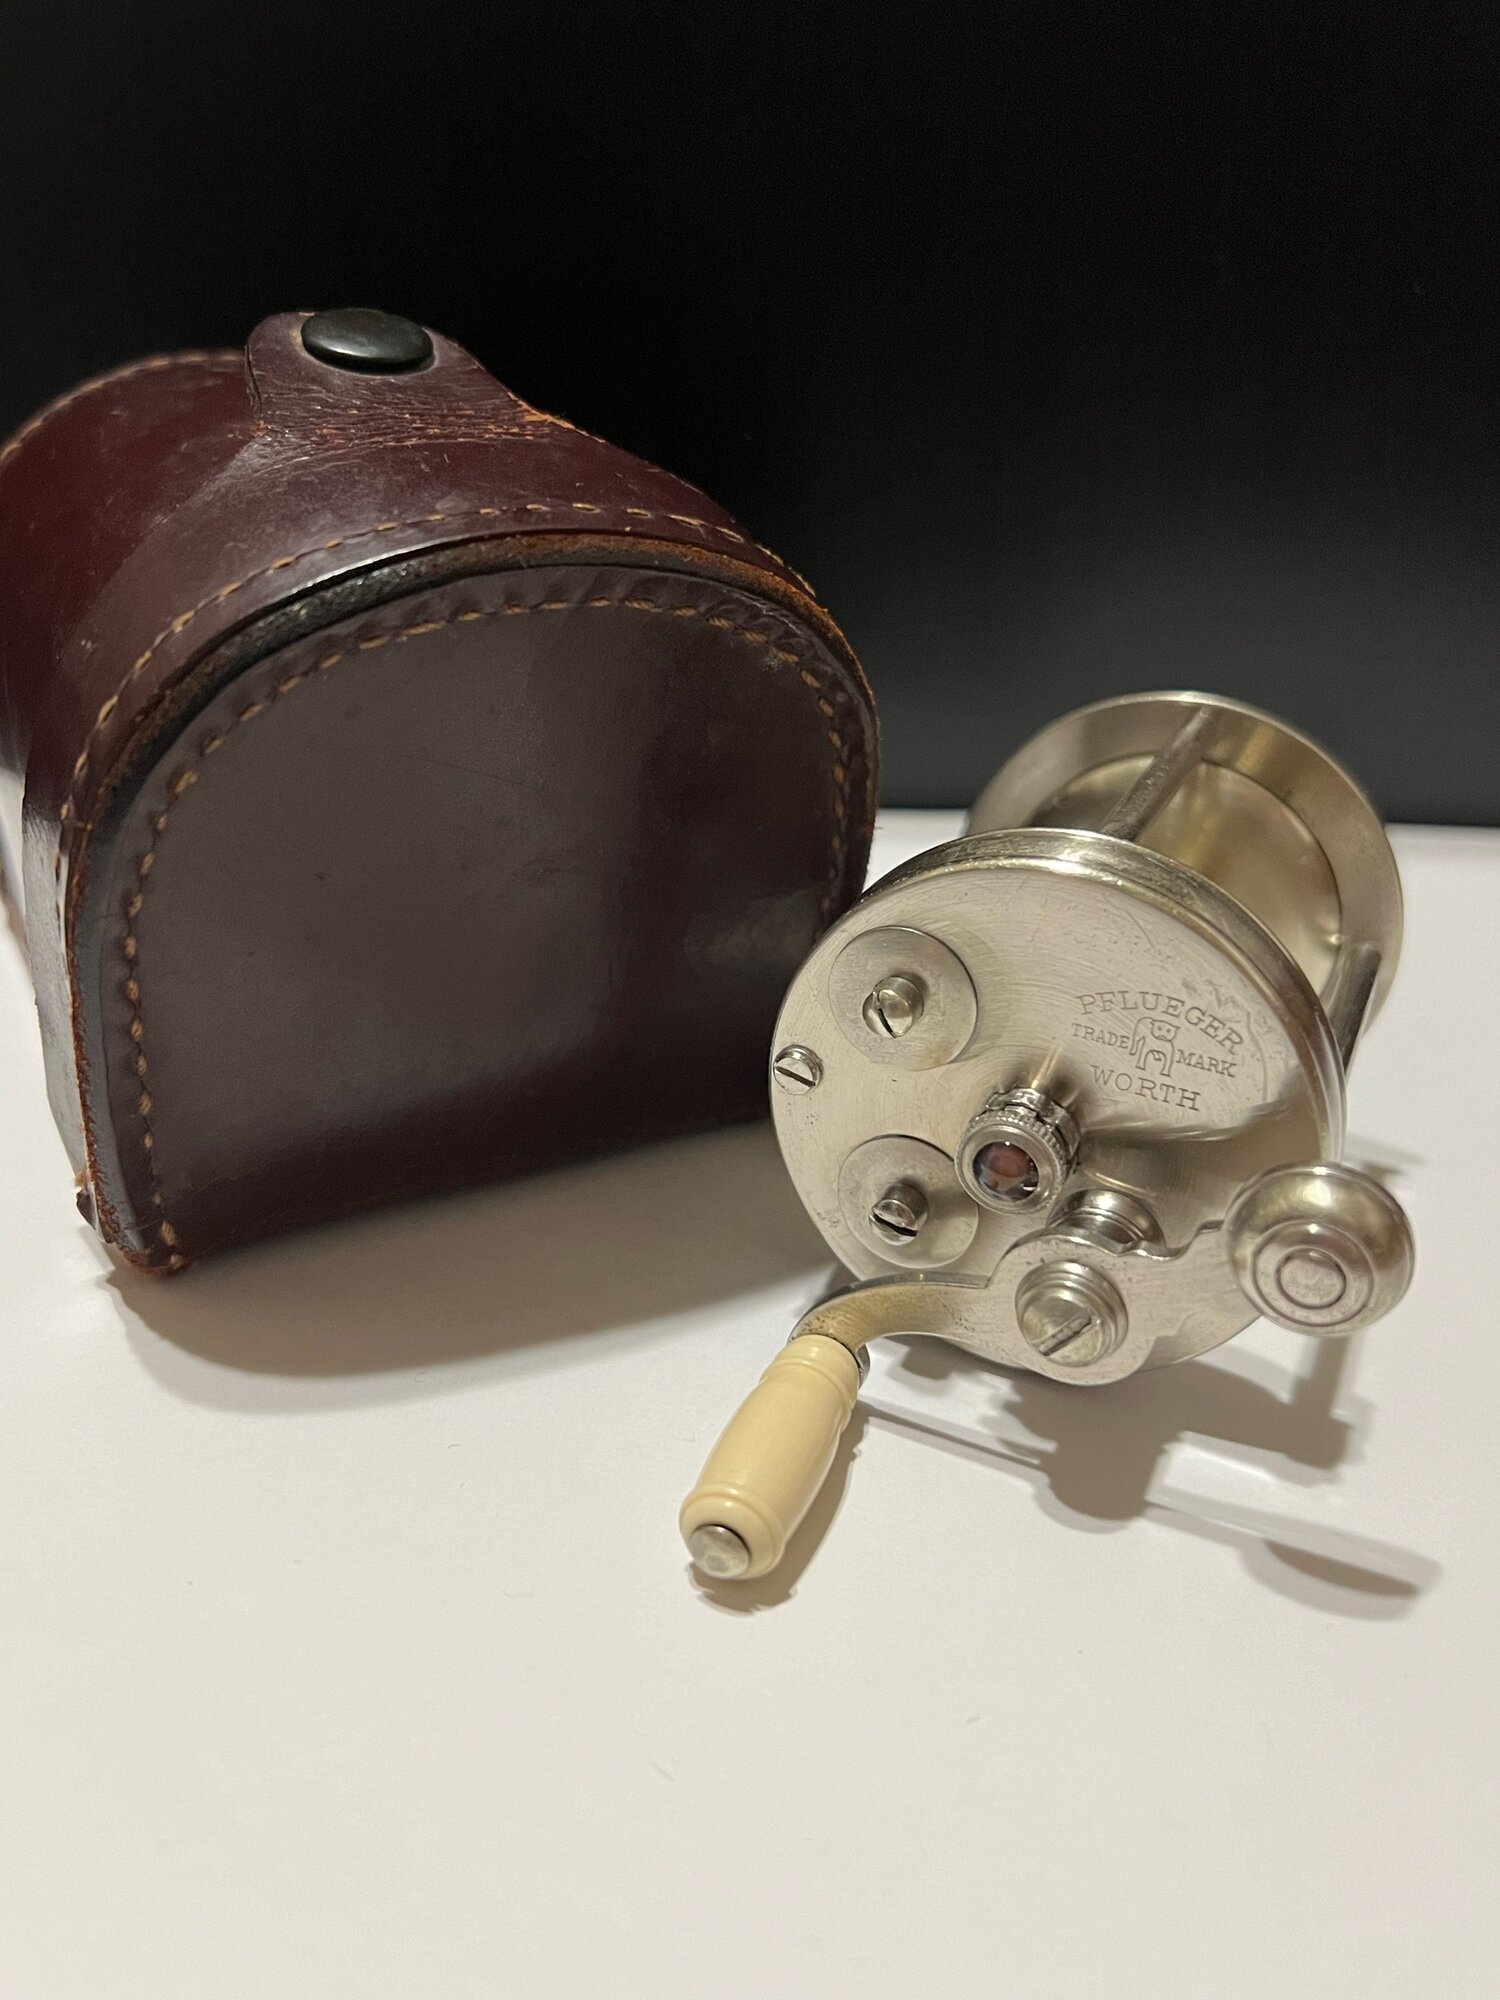 Sold at Auction: Vintage Pflueger-Supreme Standard Fishing Reel with Leather  Case